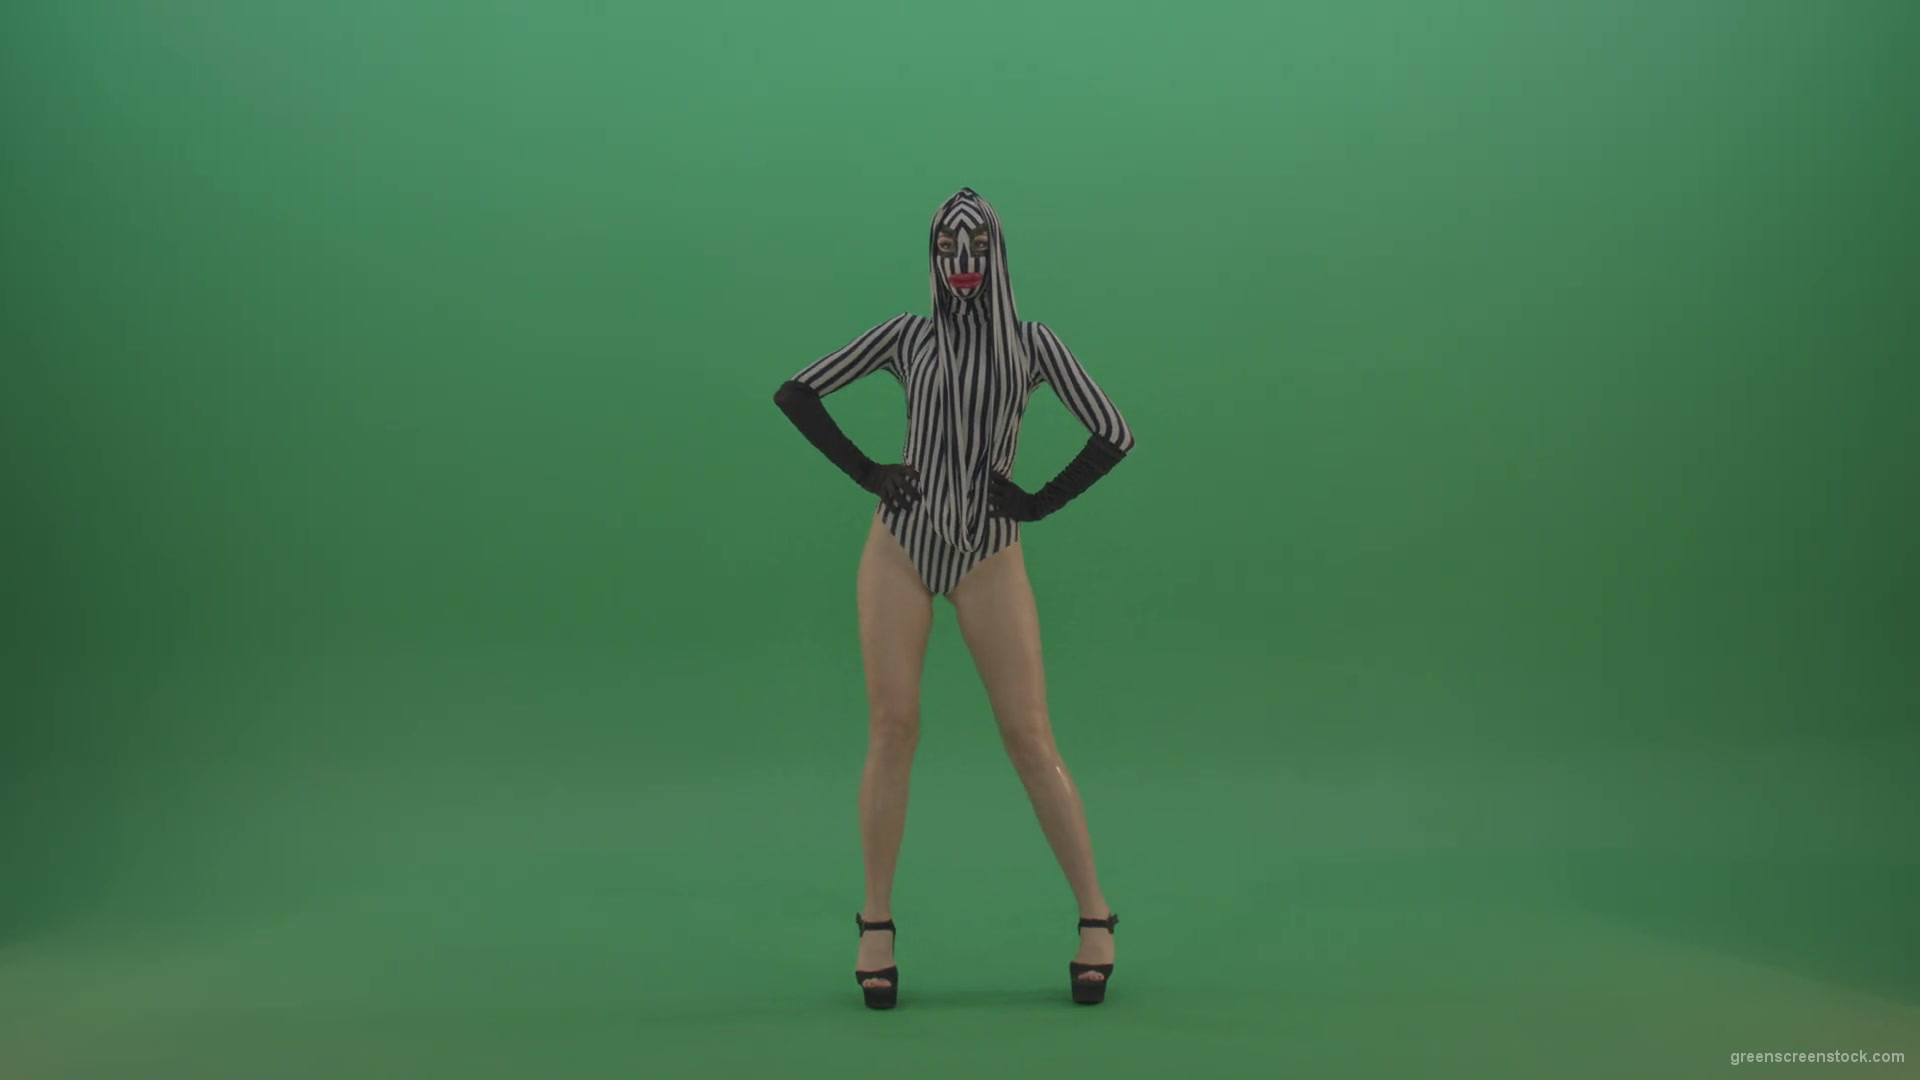 Ass-shake-beats-by-edm-go-go-girl-dance-isolated-on-green-screen-1920_002 Green Screen Stock